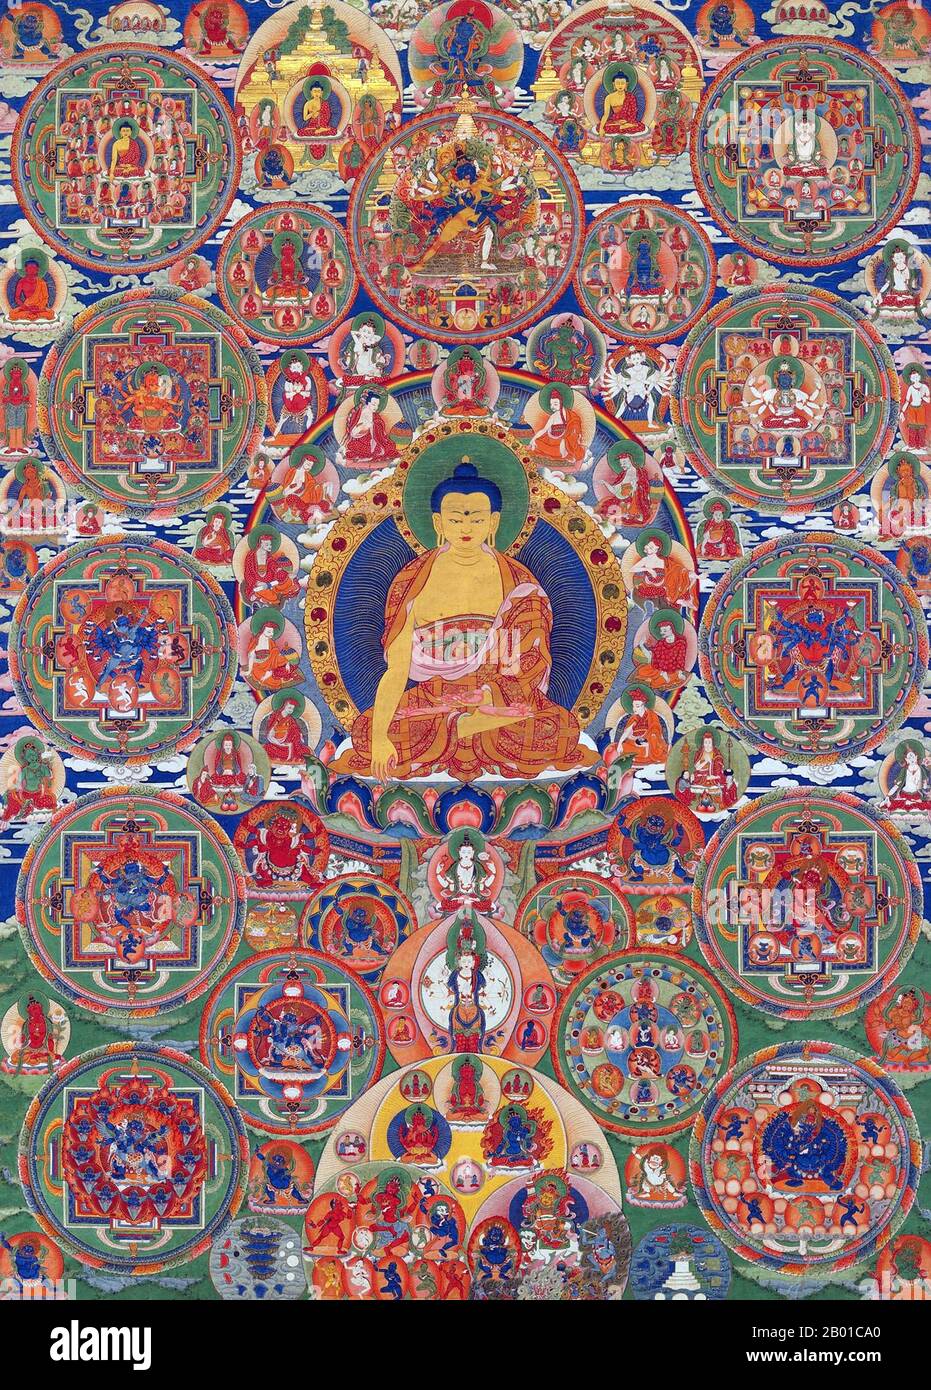 Bhutan: A Buddhist mandala from Seula Gompa, Punakha, 19th century.  A mandala is a geometric configuration of symbols, used for focusing the attention of practitioners and adepts, and as a spiritual guidance tool. In Buddhism it is also used as a map to represent deities.  It is estimated that between two thirds and three quarters of the Bhutanese population follow Vajrayana Buddhism, which is also the state religion. About one quarter to one third are followers of Hinduism.  Buddhism was introduced to Bhutan in the 7th century AD. Stock Photo